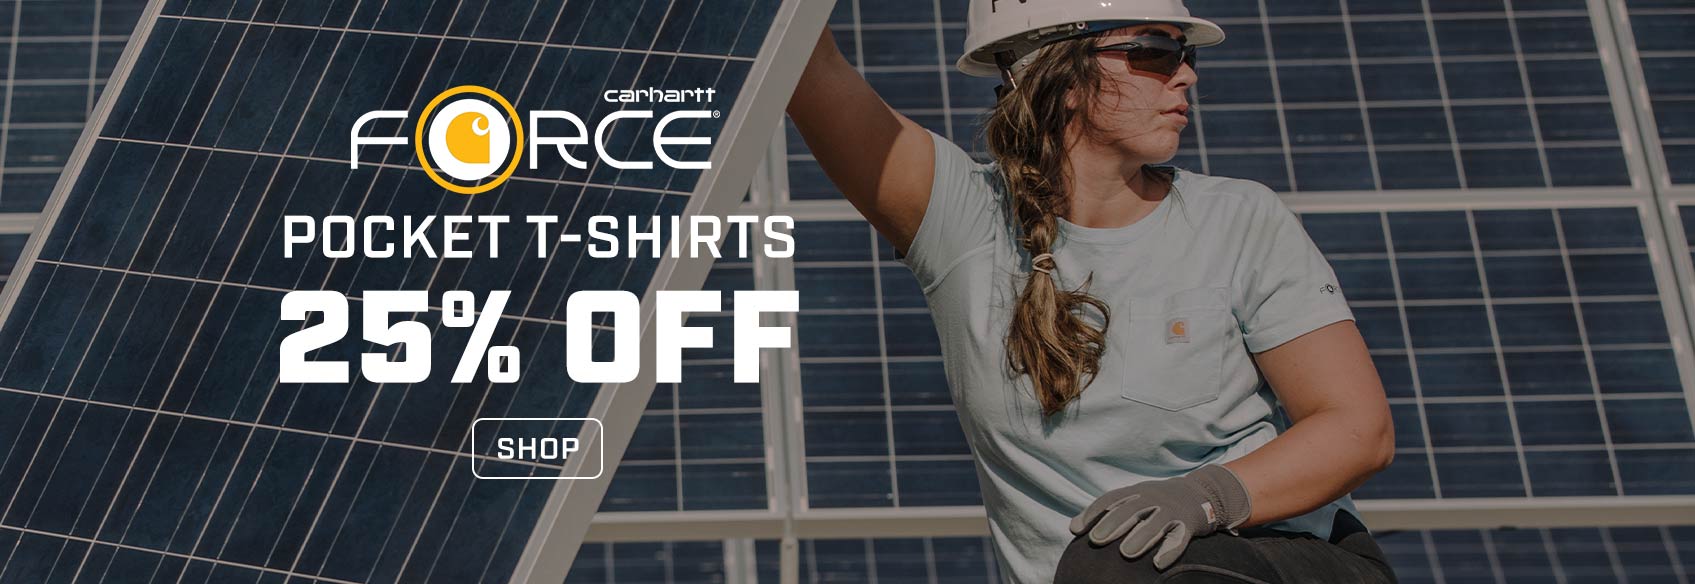 A woman working outside in a solar panel field weiring a hard hat and Carhartt t-shirt